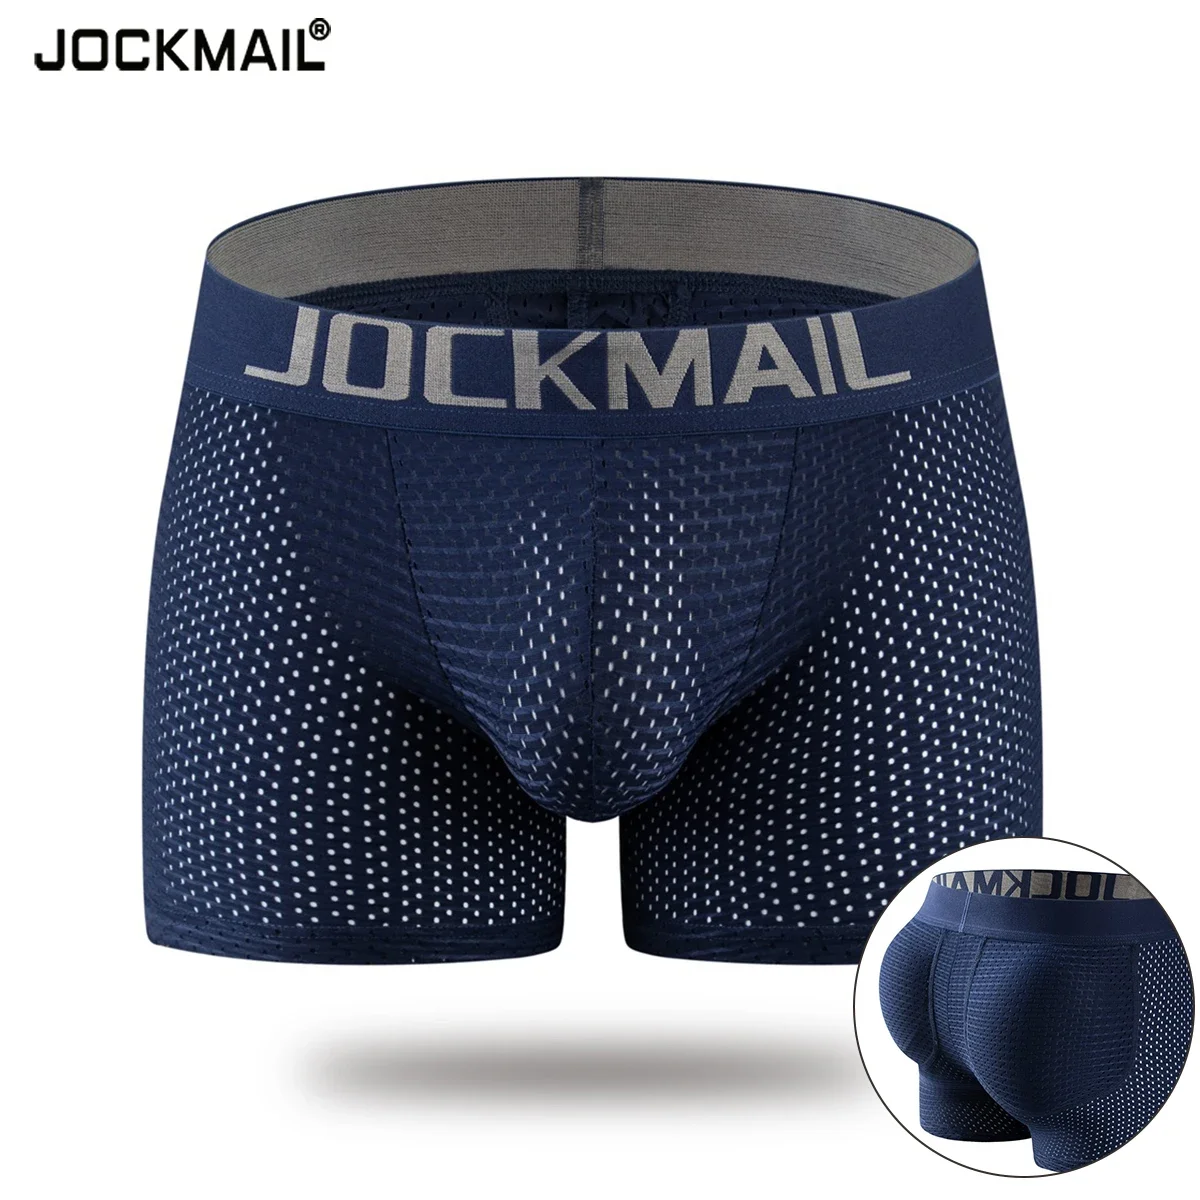 JOCKMAIL Sexy Underwear Men's Boxer Shorts Mesh U Pouch Sexy Underpants with Hip Pads Cueca Boxer Men Sleep Bottoms Male Trunks enhance your performance with our breathable men s boxer briefs lightweight mesh underwear for active lifestyles